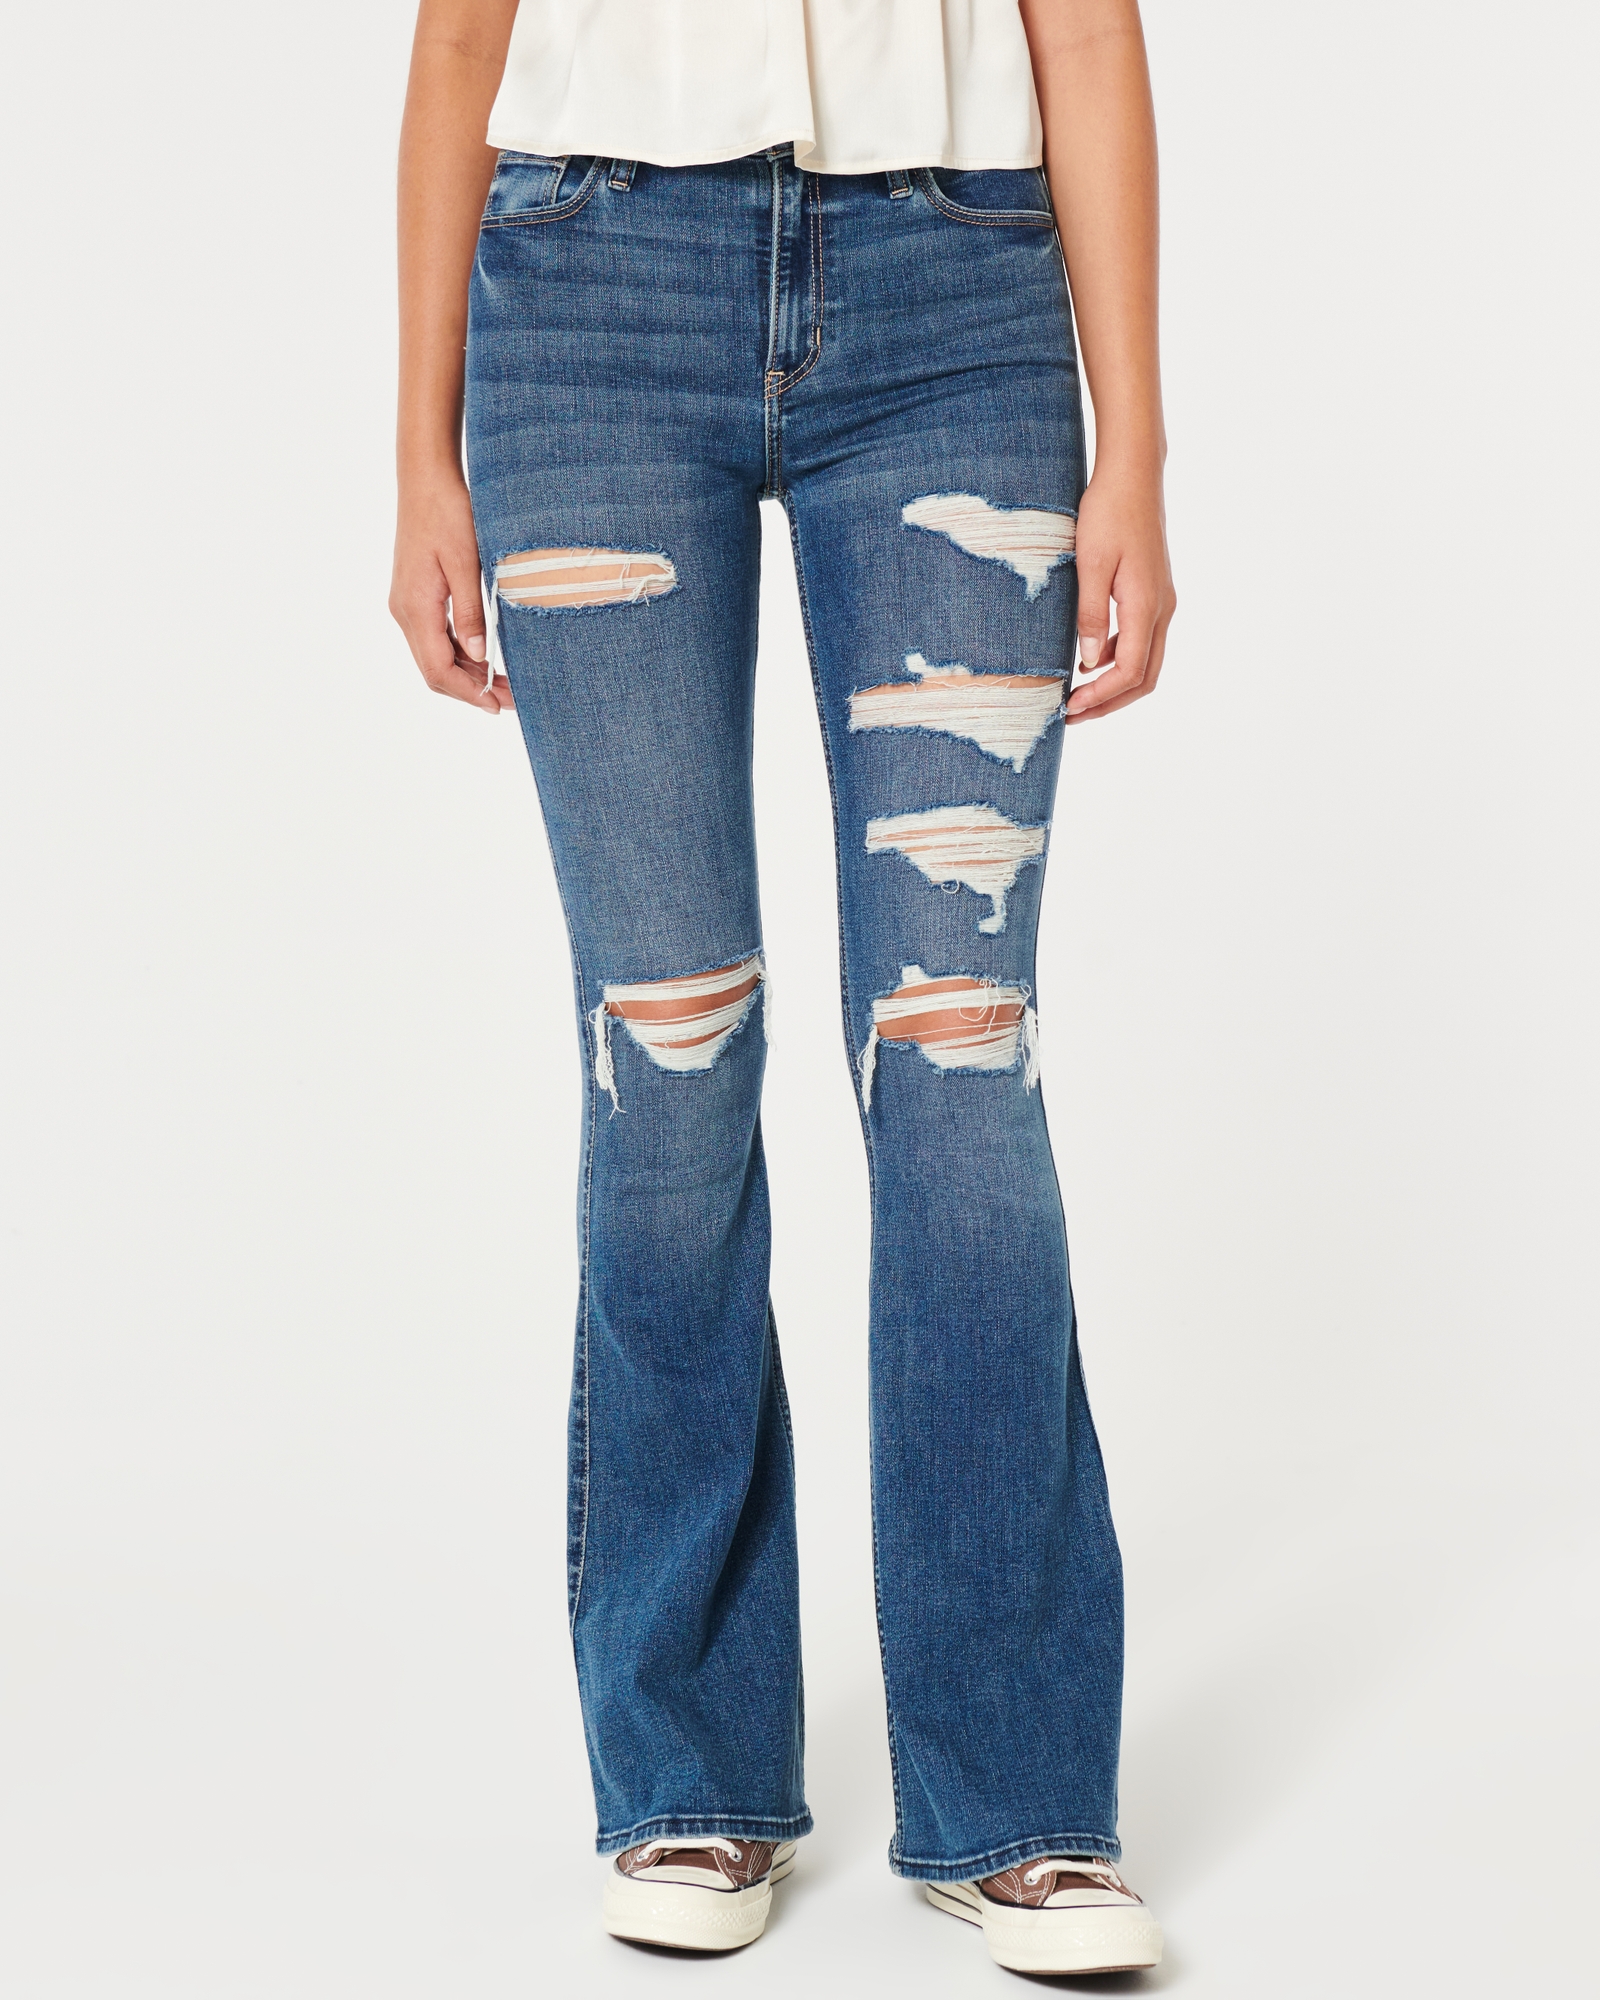 Hollister Low-rise Medium Wash Flare Jeans in Blue